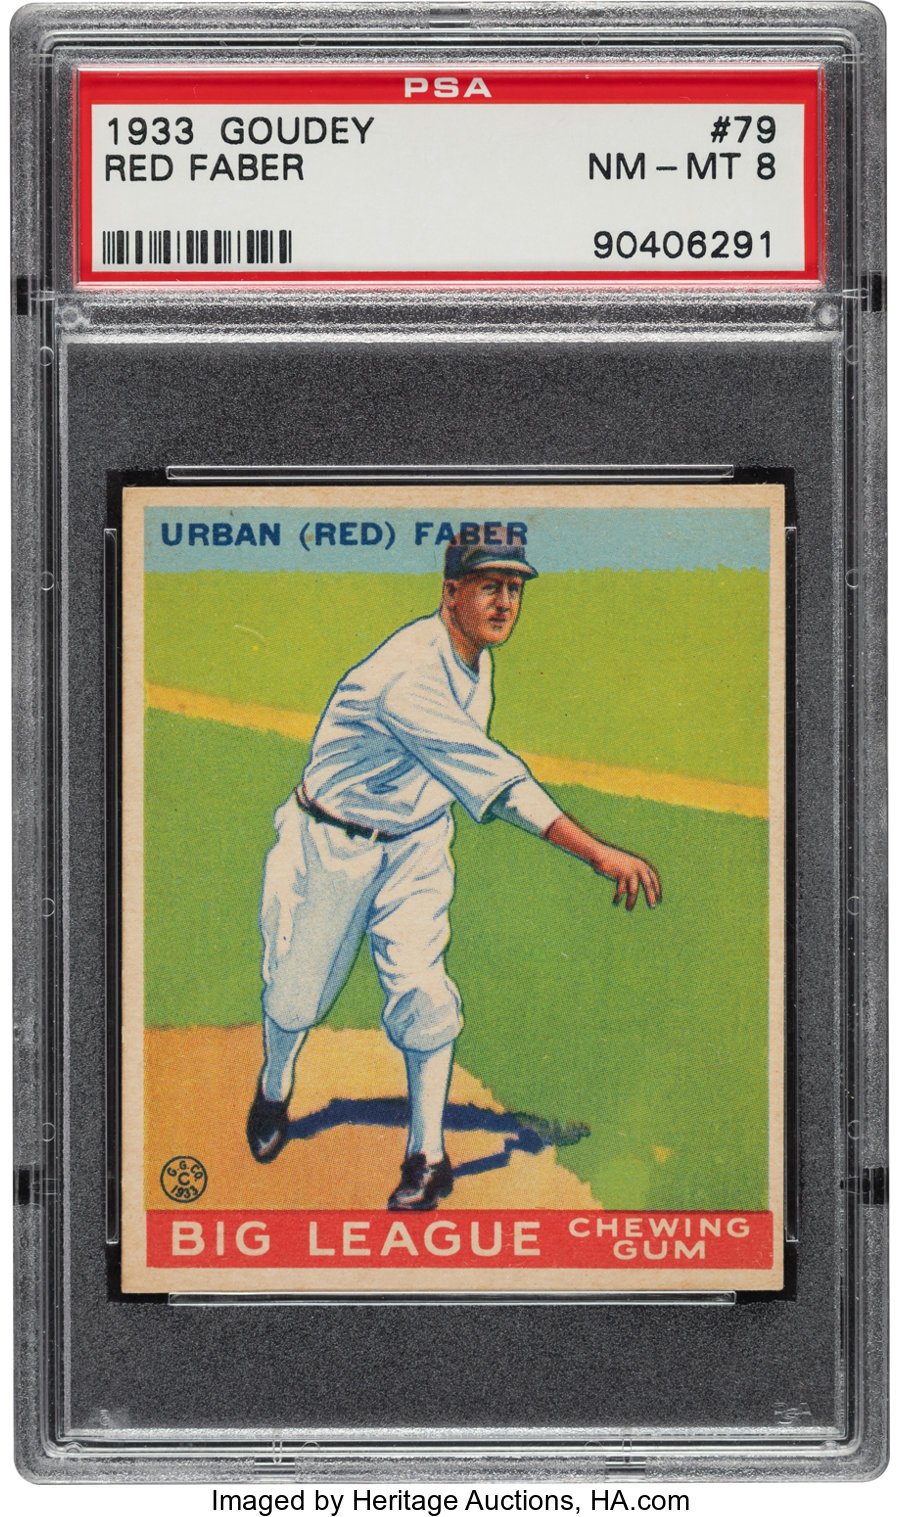 1933 Goudey Red Faber #79 PSA NM-MT 8 - Two Higher